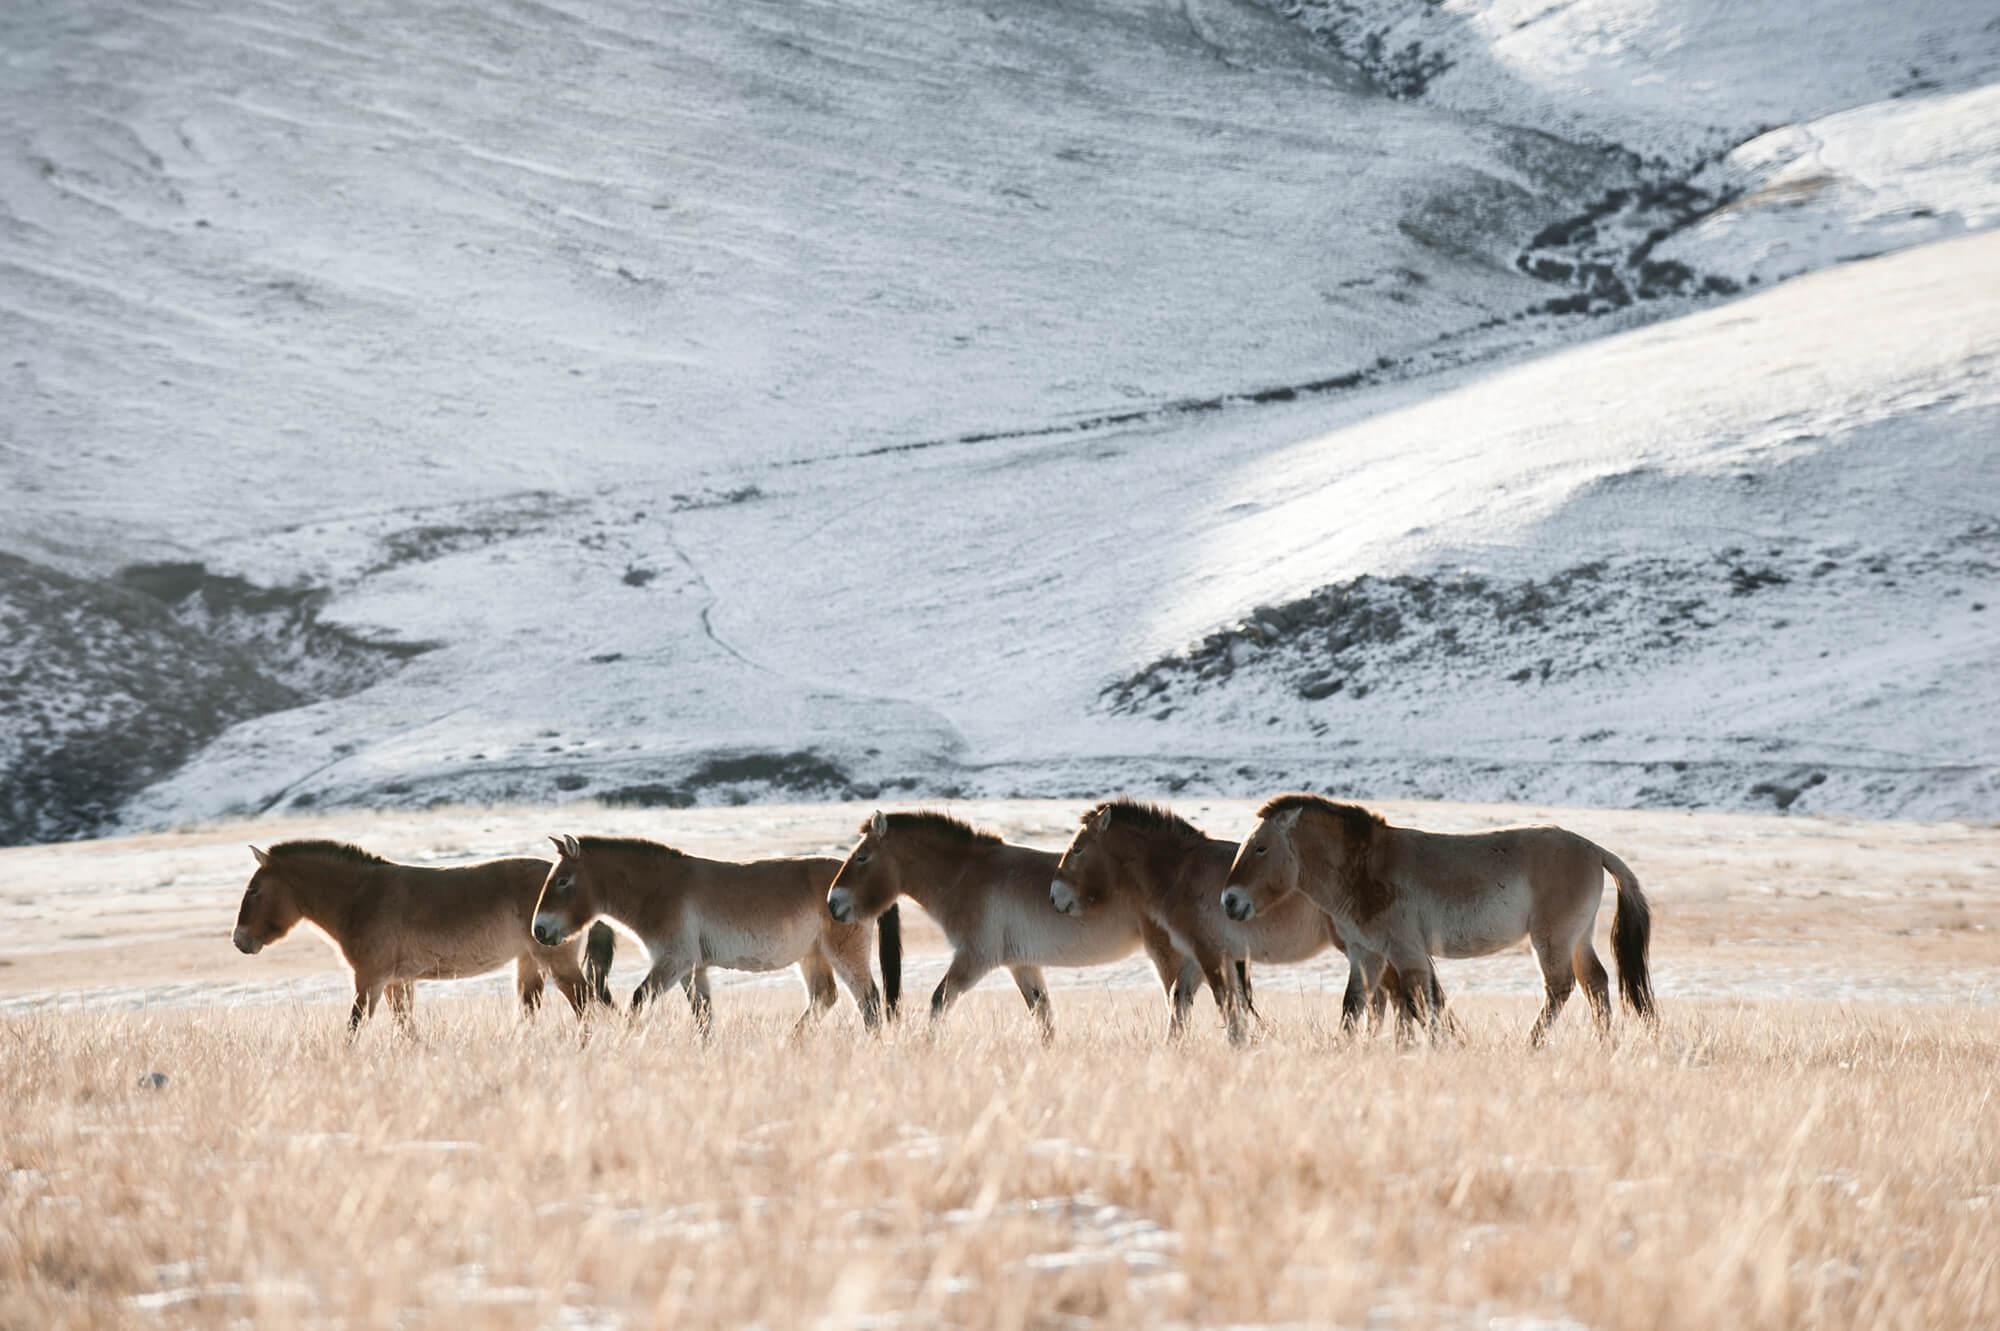 A small herd of Przewalski horses against snow-covered mountains. Photographer: Astrid Harrisson. Location: Mongolia.